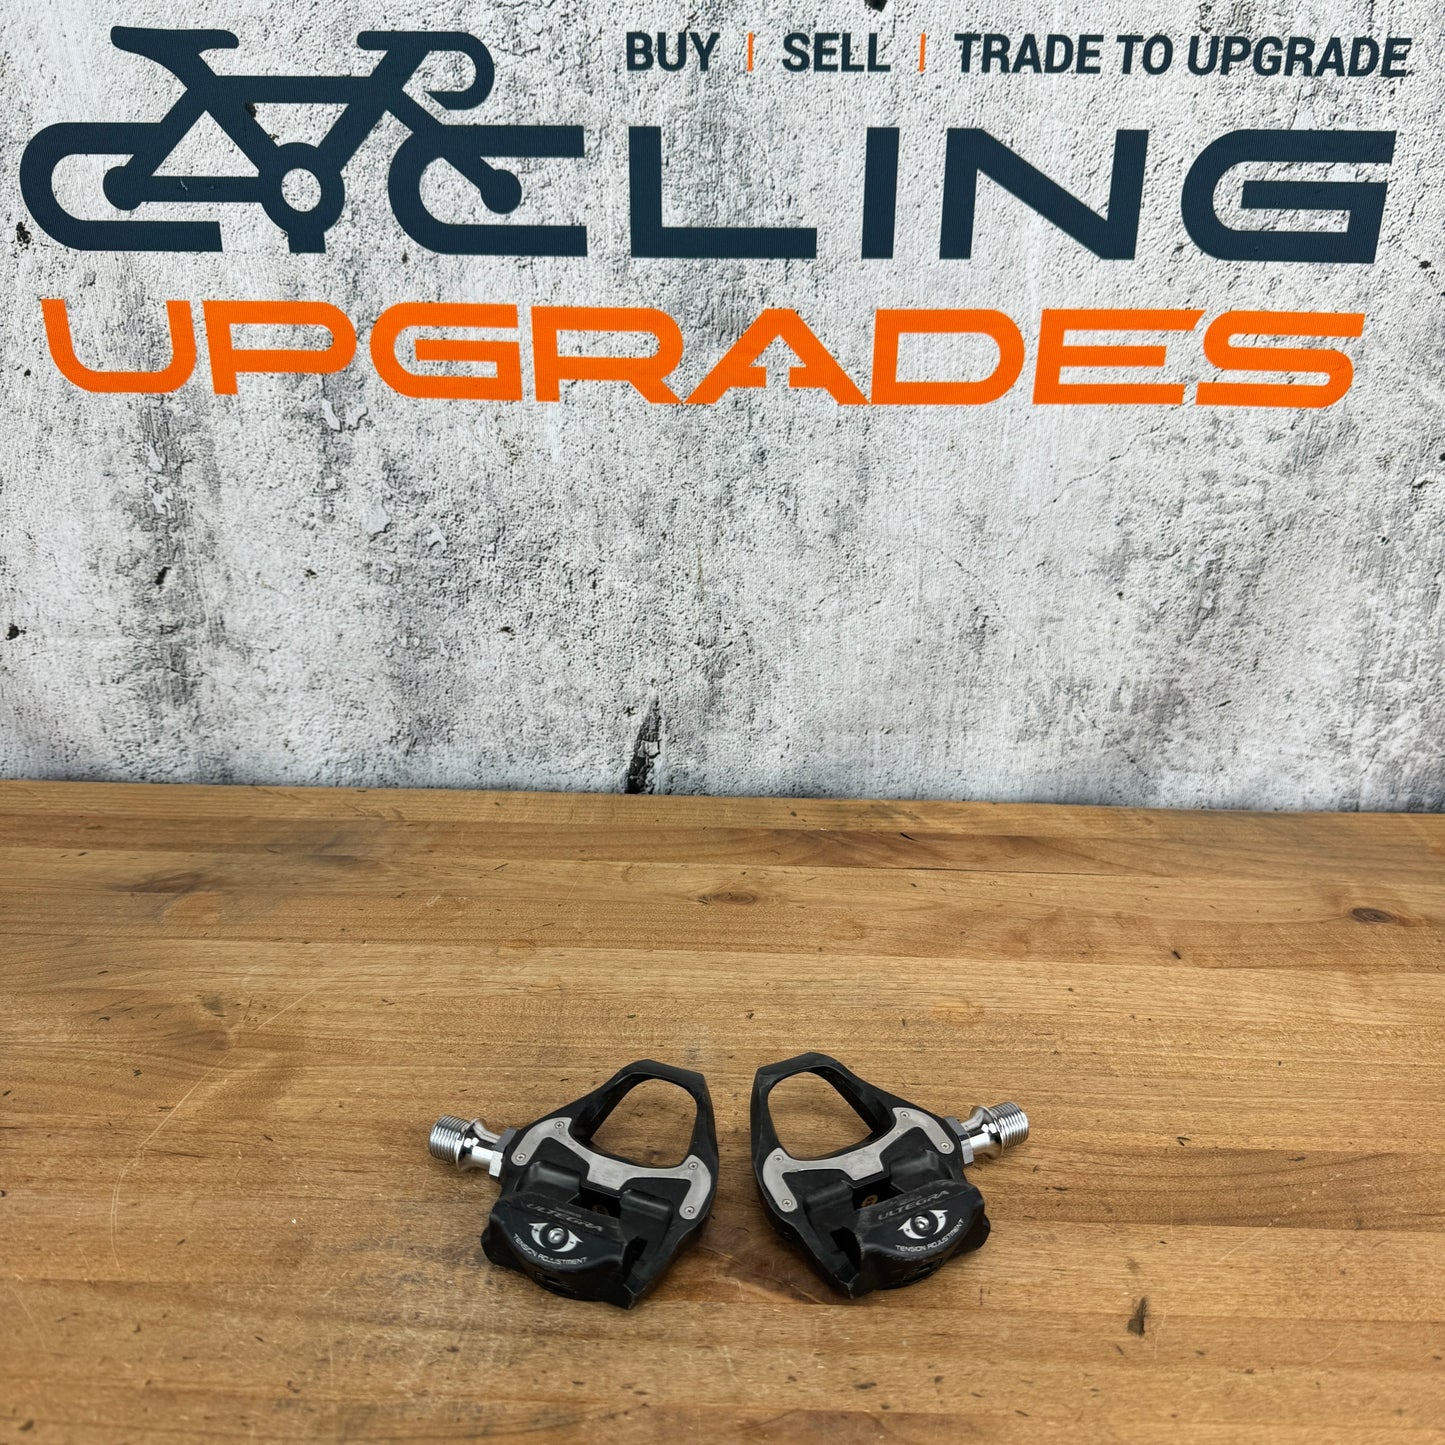 Shimano Ultegra PD-6800 Stainless Steel Spindle Clipless Bike Pedals 258g